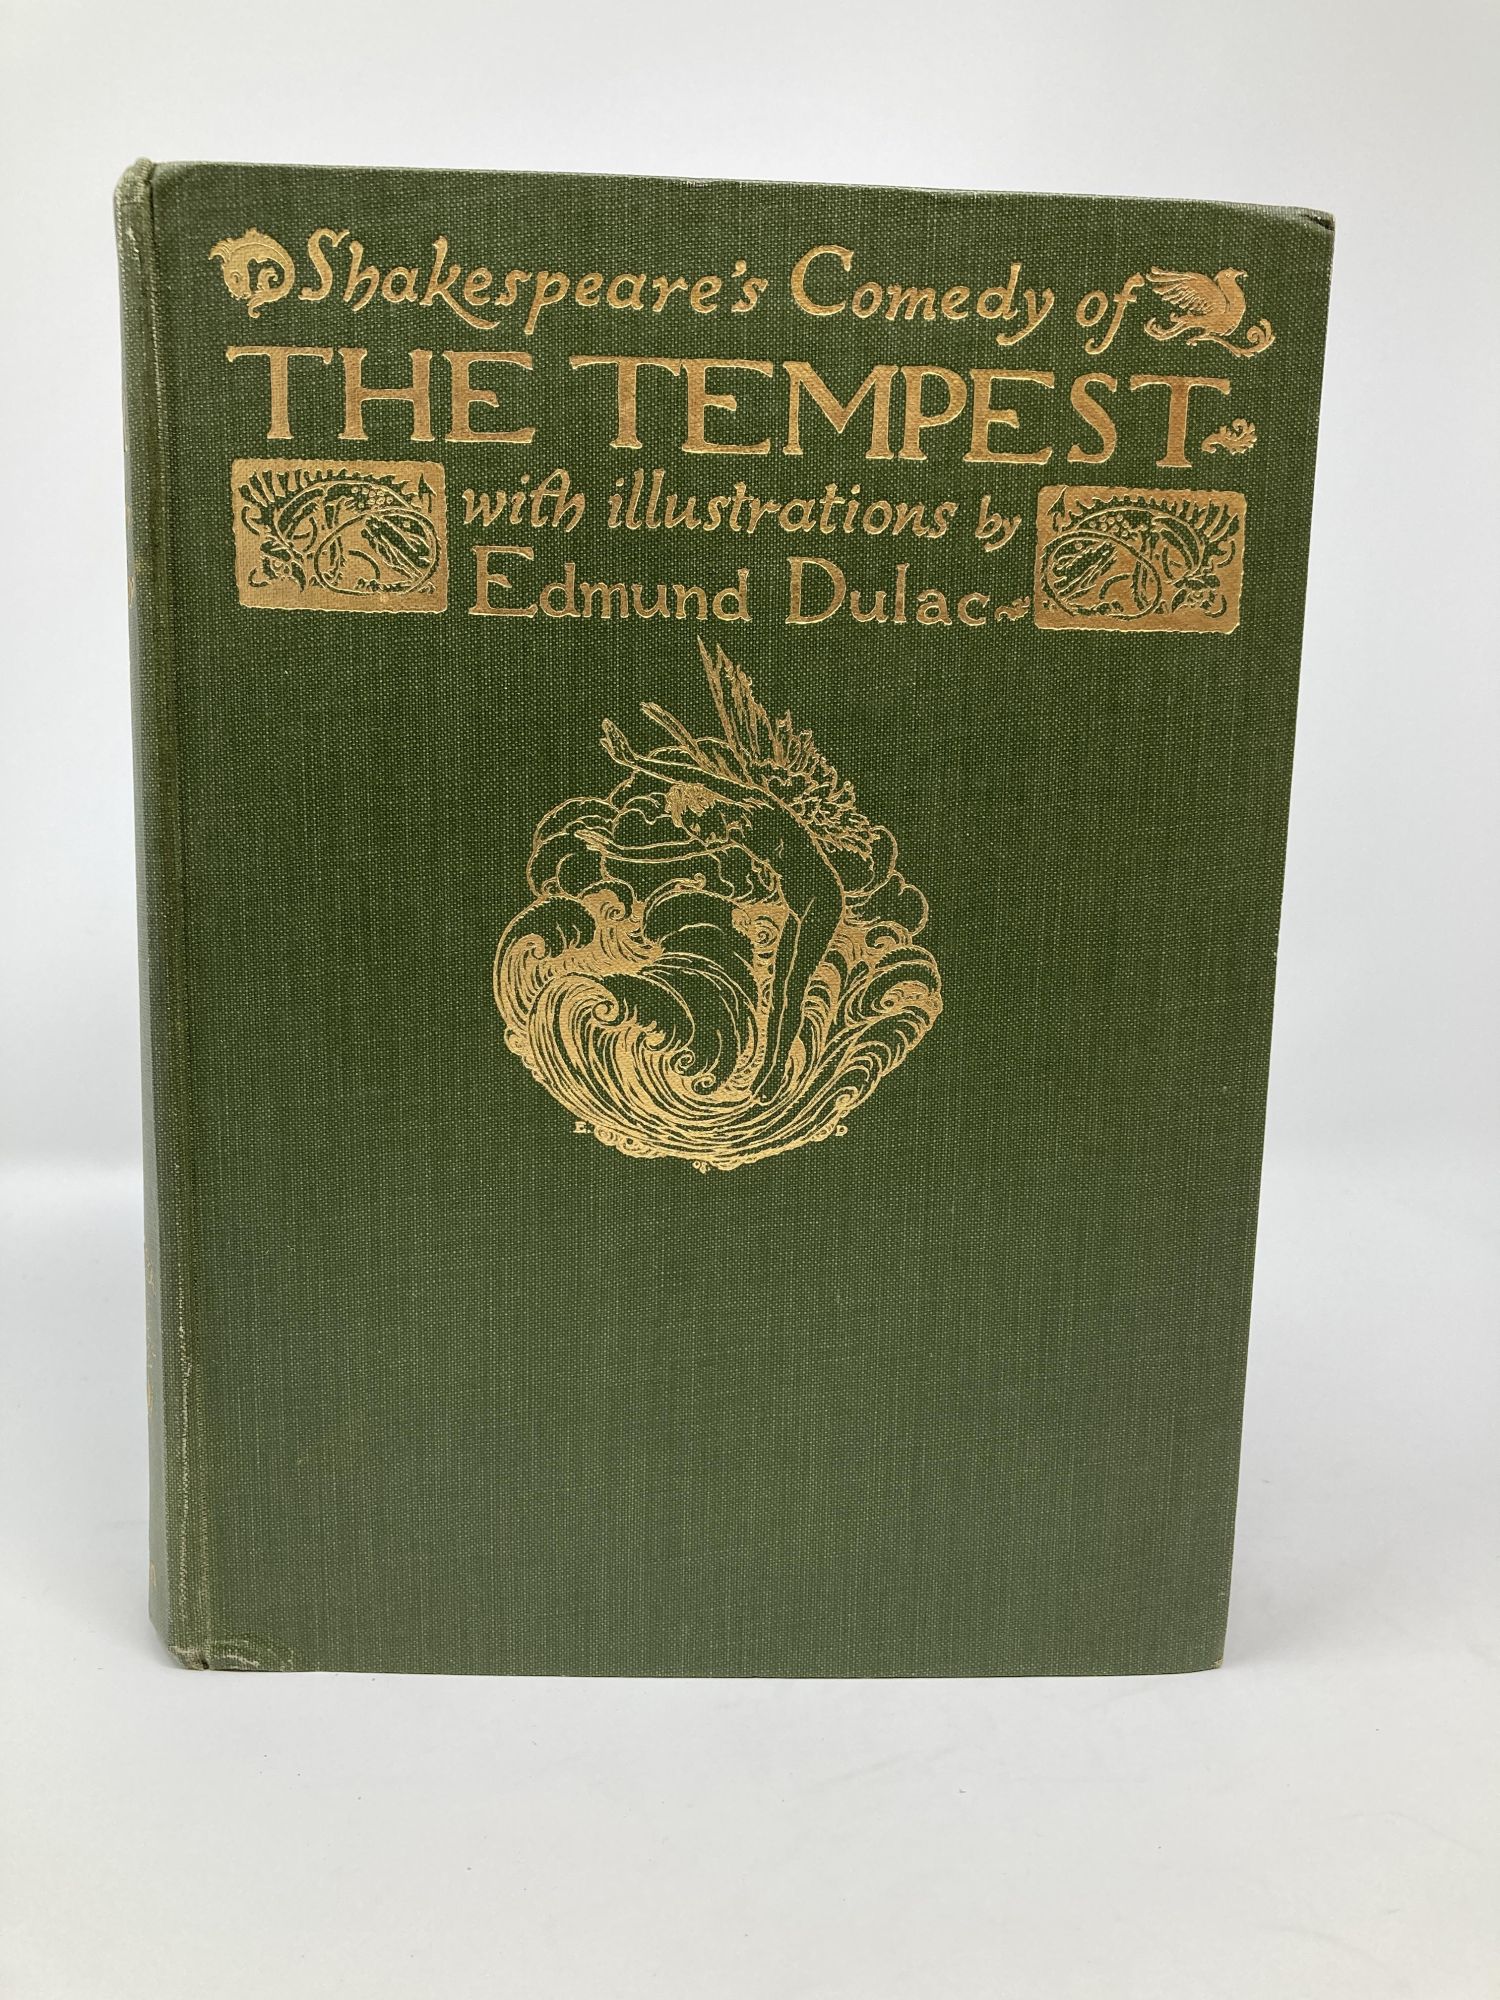 Shakespeare, William - Shakespeare Comedy of the Tempest with Illustrations by Edmund Dulac